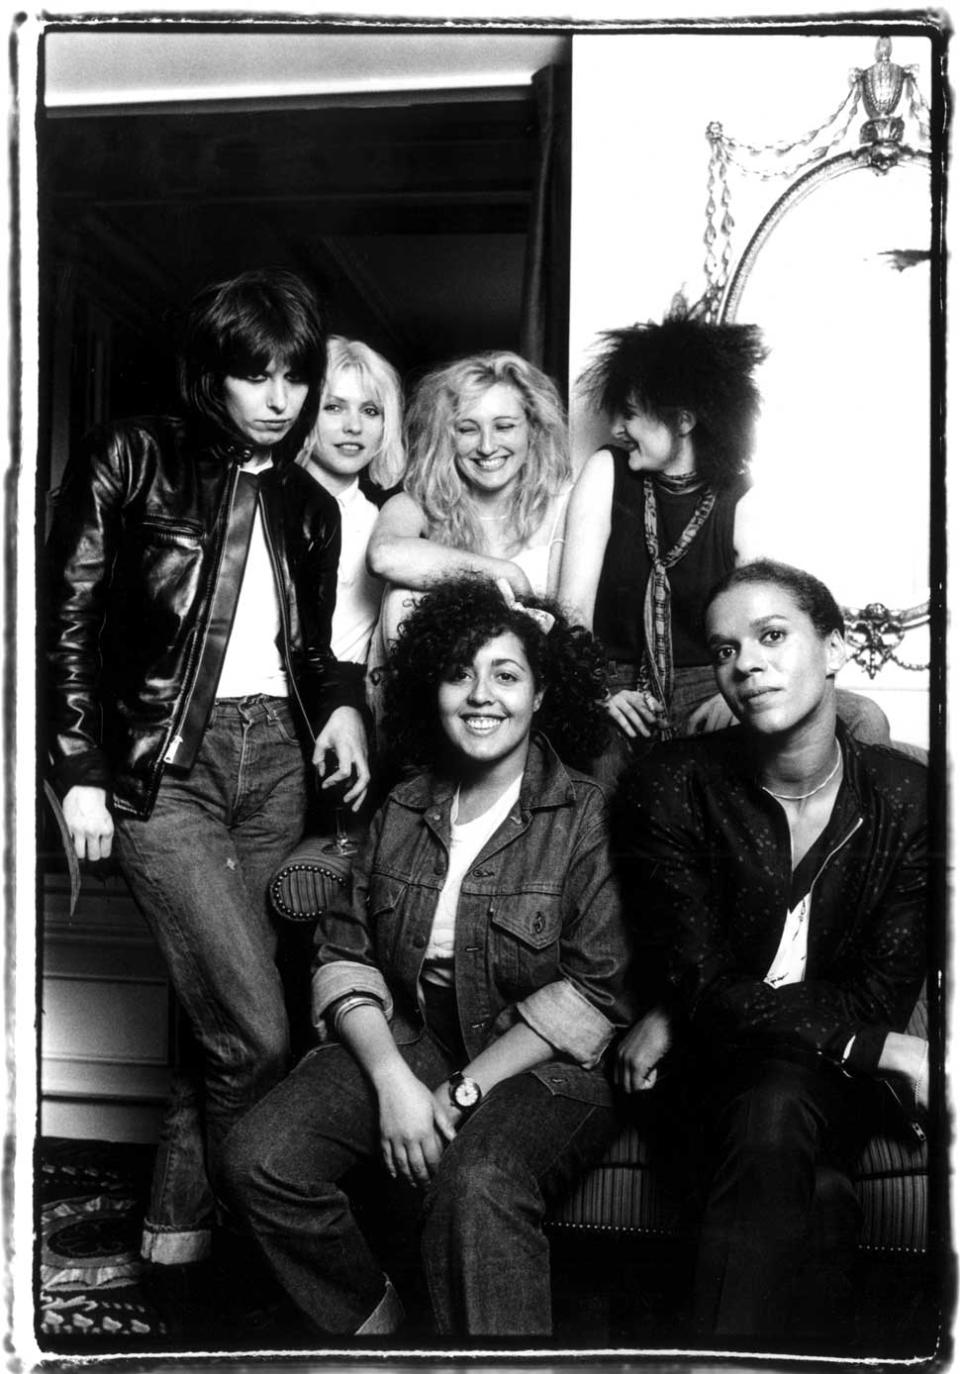 Chrissie Hynde of The Pretenders, Debbie Harry of Blondie, Viv Albertine of The Slits, Poly Styrene of X-Ray Spex, Siouxsie Sioux of Siouxsie And The Banshees and Pauline Black of The Selecter